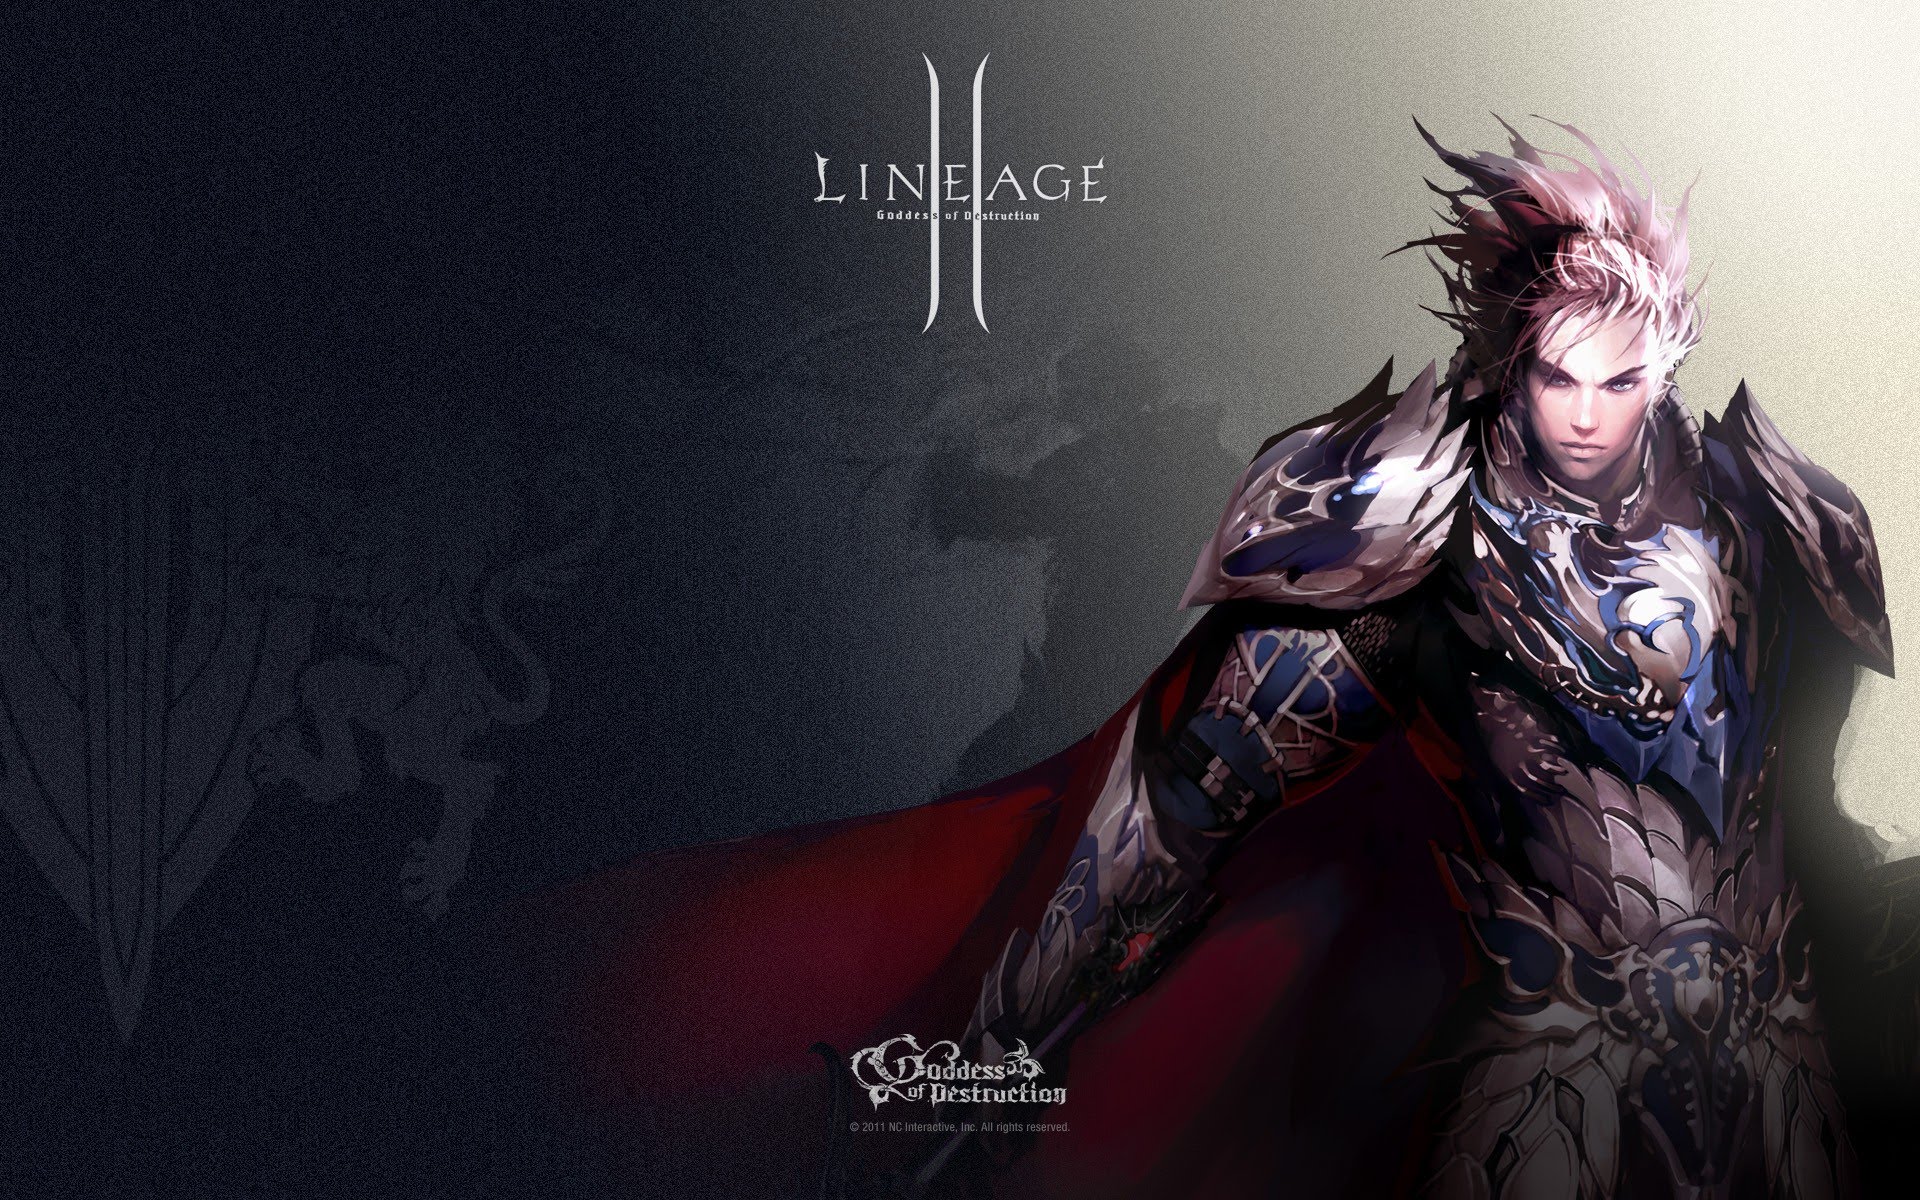 Nice Images Collection: Lineage II Desktop Wallpapers